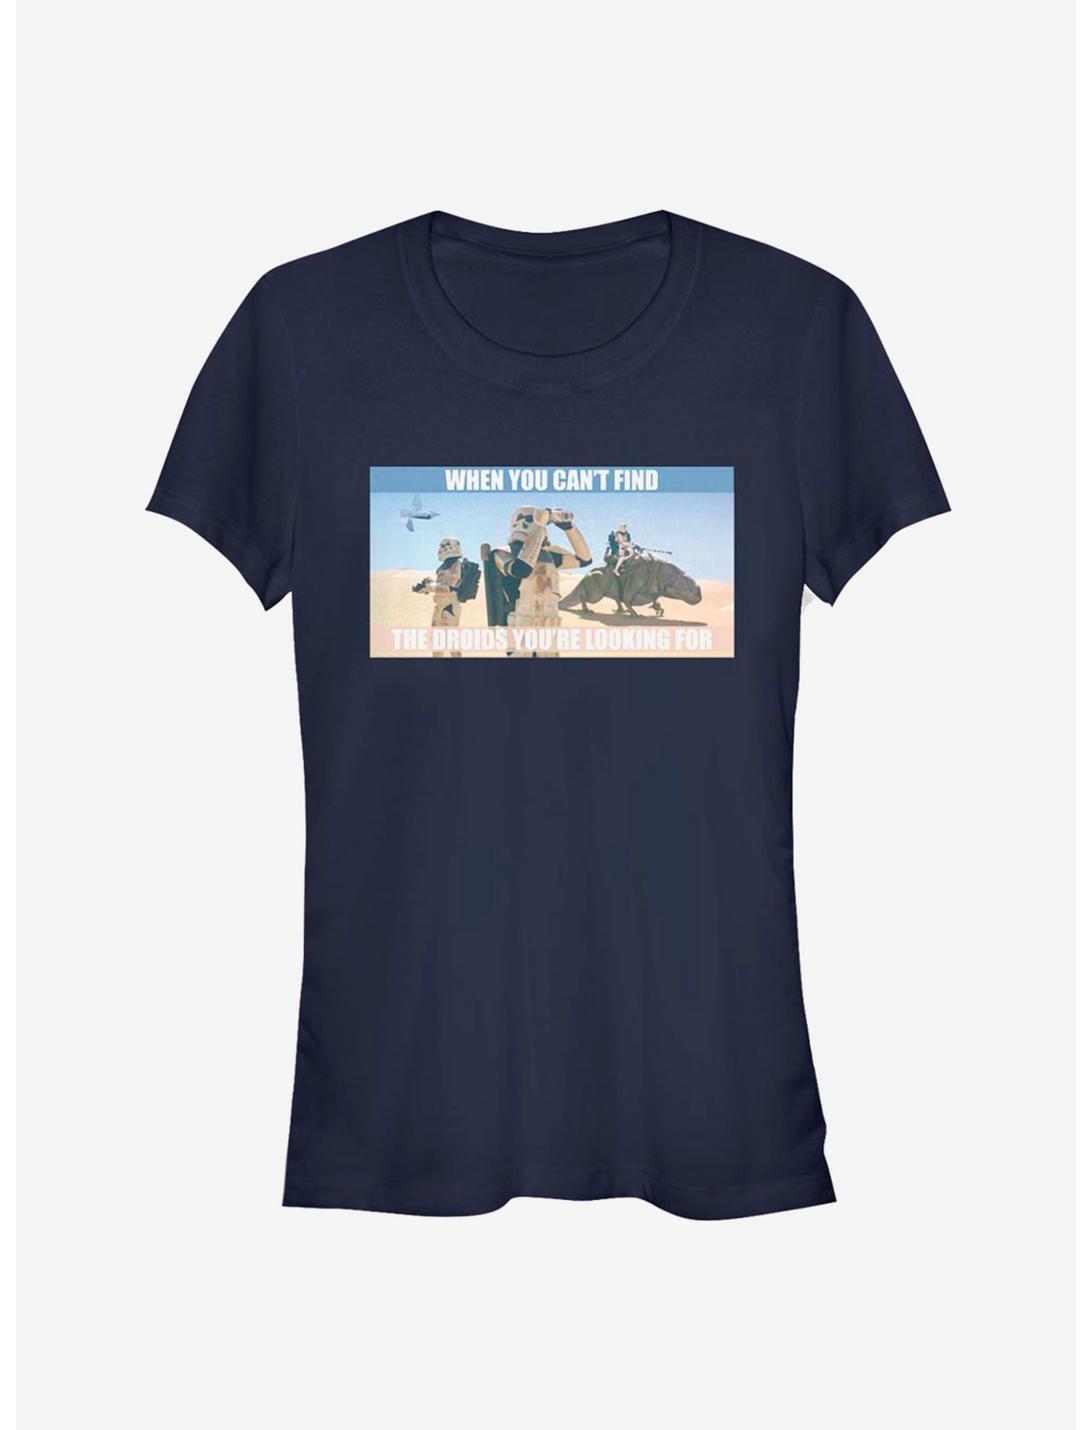 Star Wars Cant Find The Droids Girls T-Shirt, NAVY, hi-res